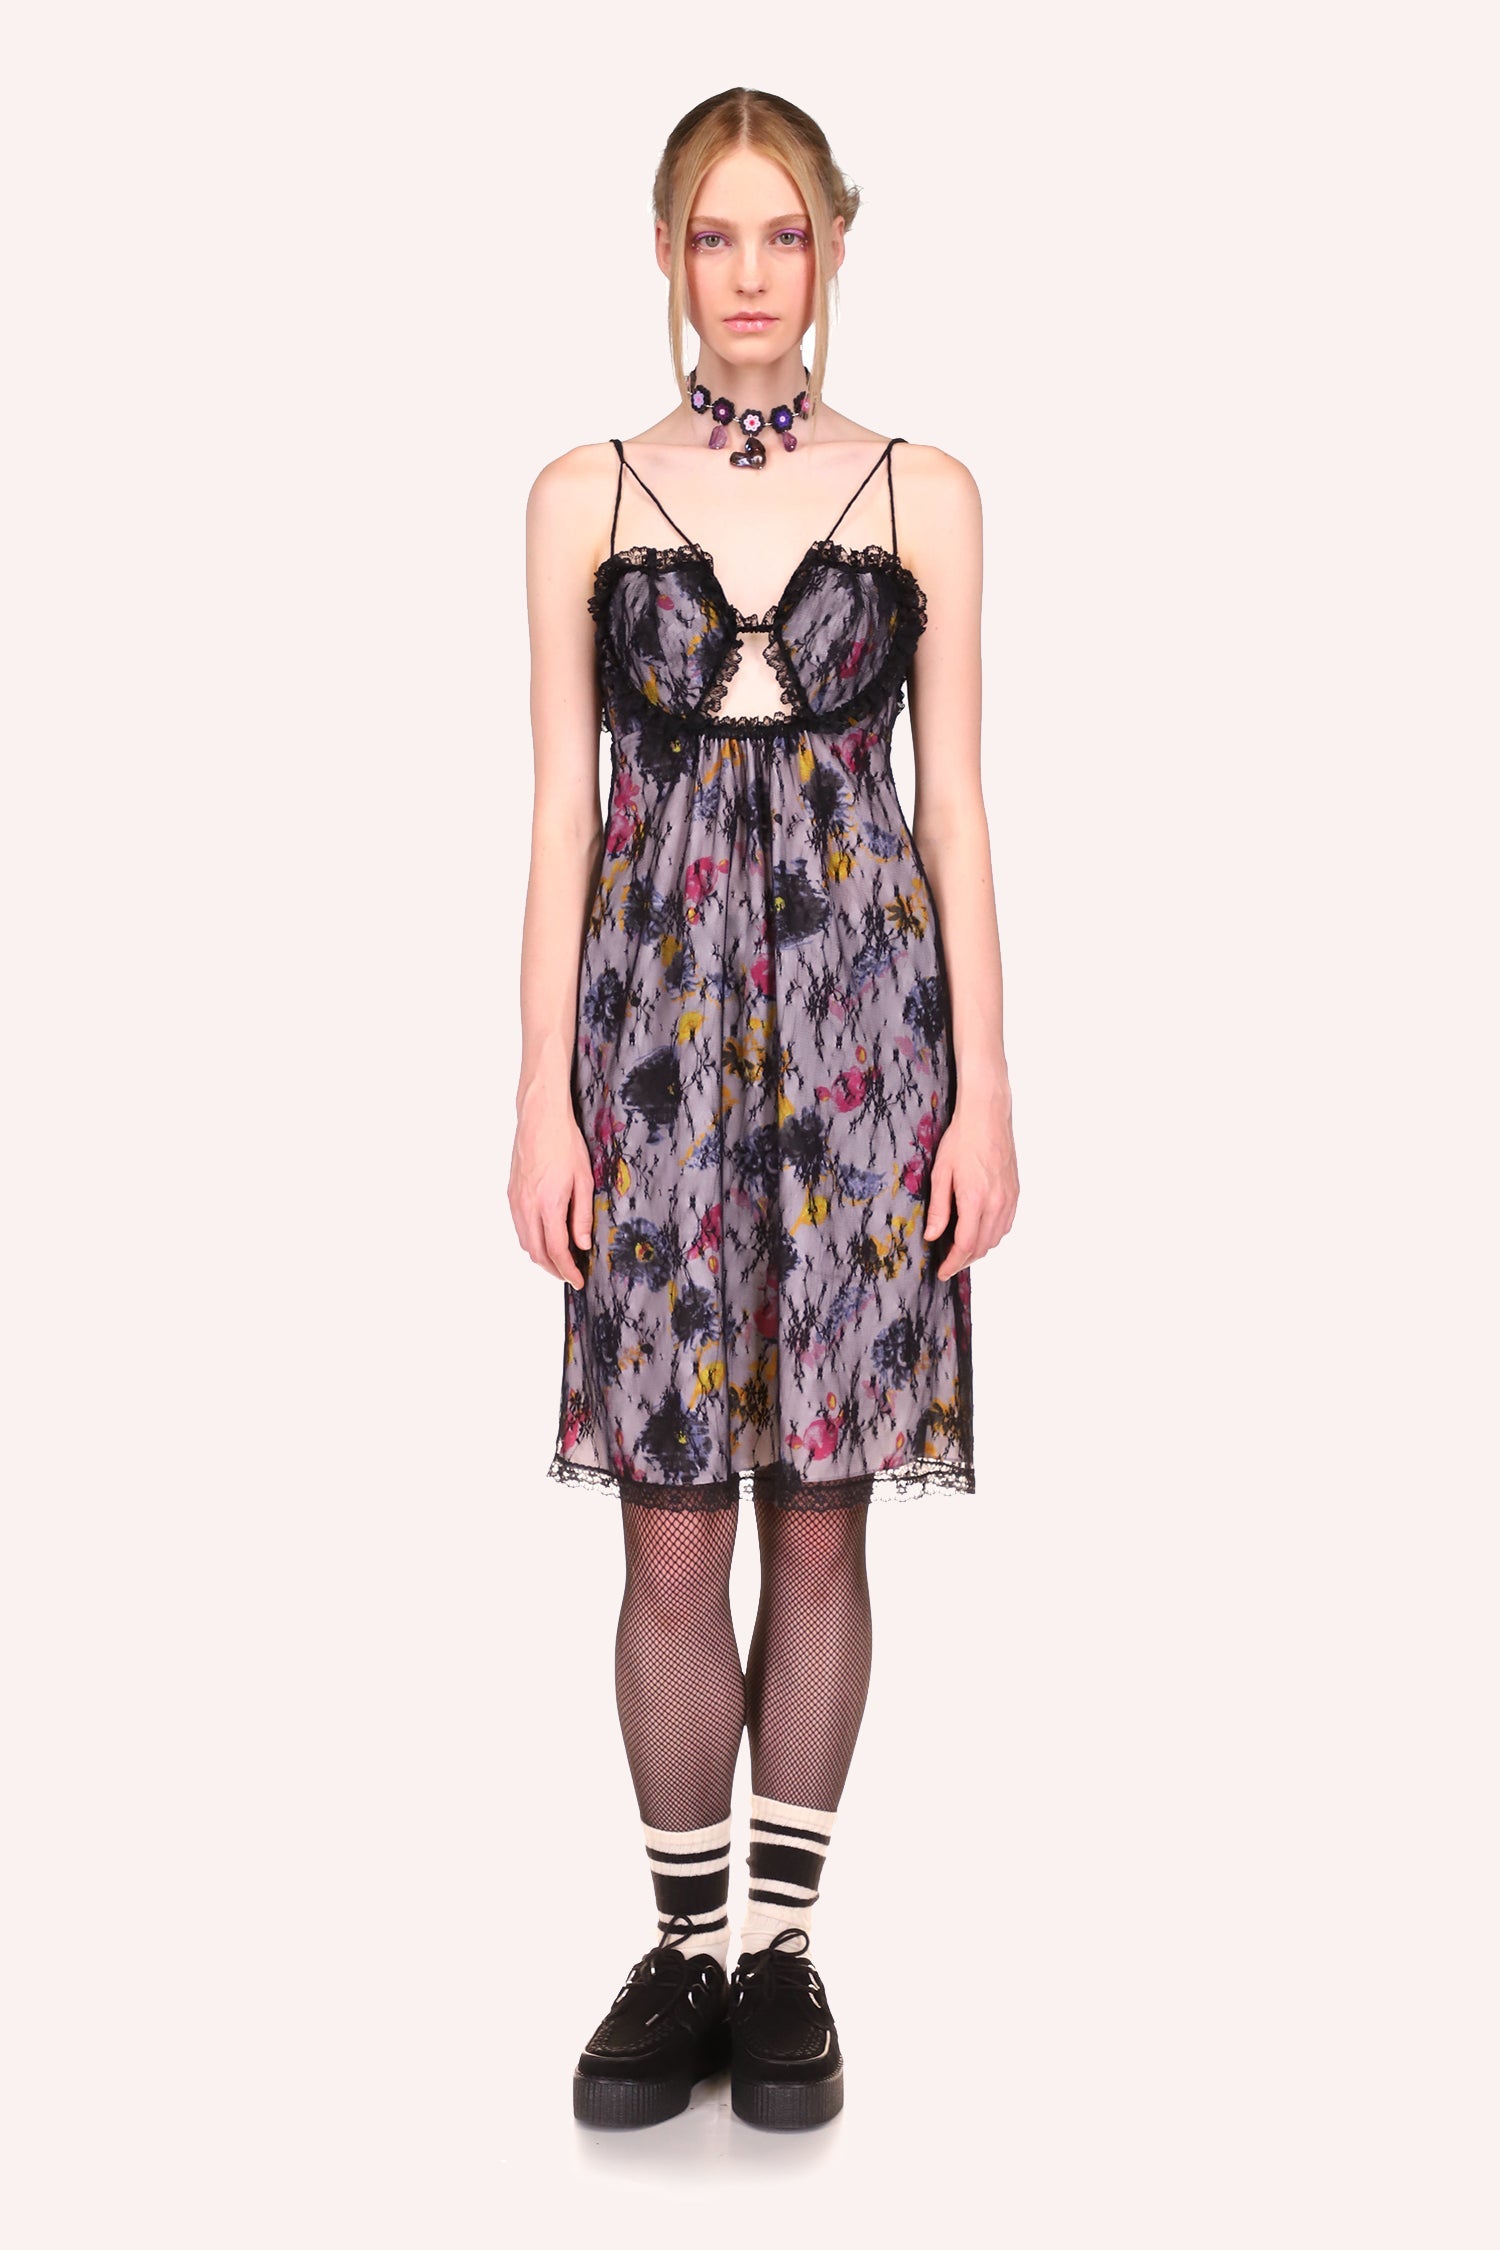 Sketch Flower and Lace Heart Dress, sleeveless, pattern of lilac, pink, yellow colors flowers, 2 straps, hems with black lace